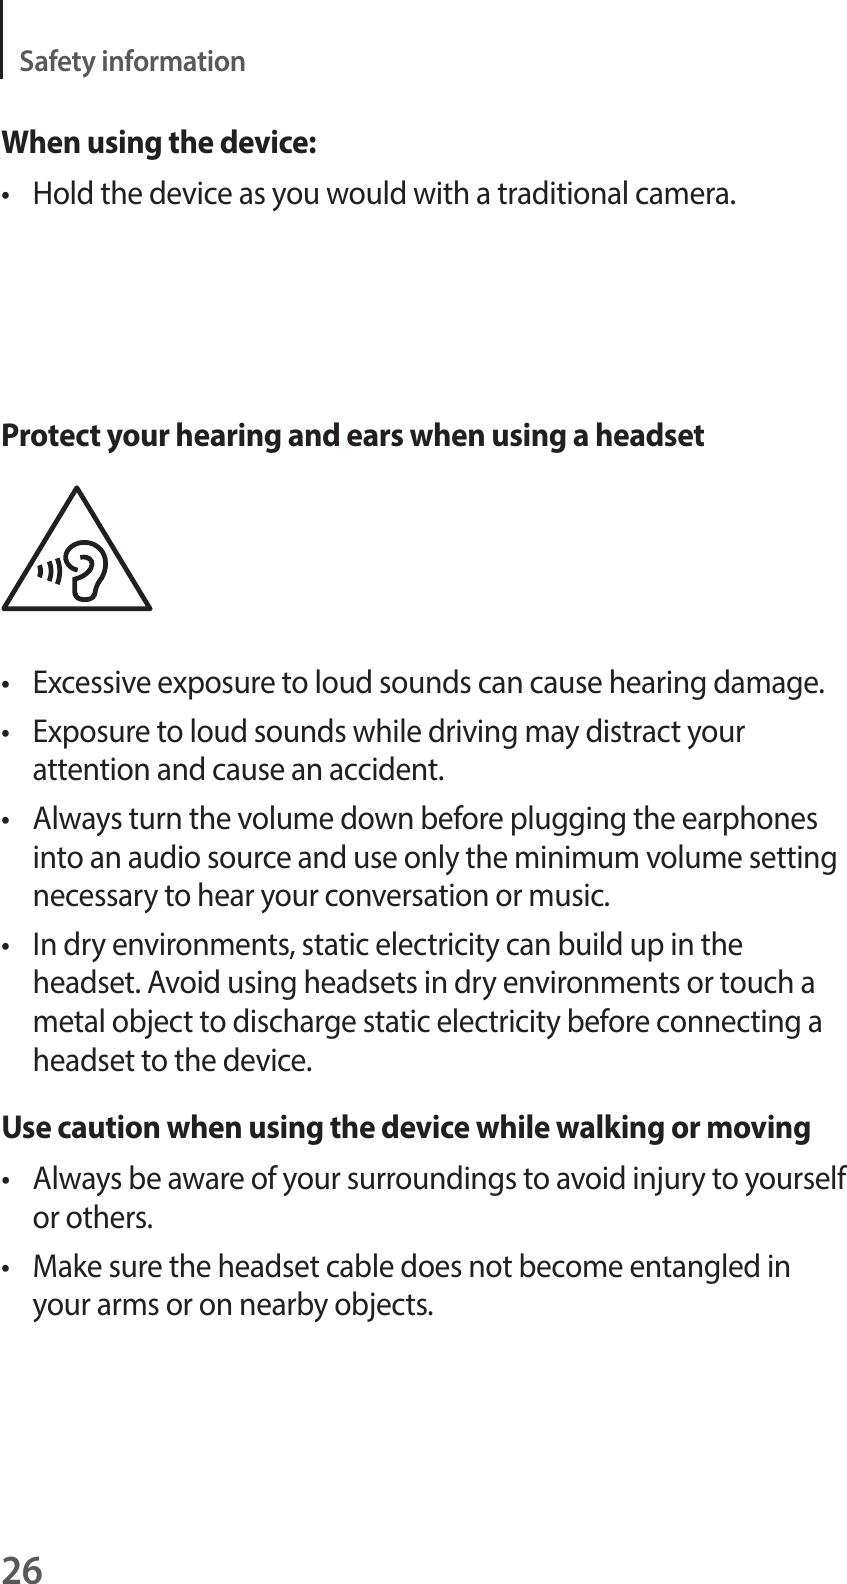 26Safety informationWhen using the device:t  Hold the device as you would with a traditional camera.Protect your hearing and ears when using a headsett  Excessive exposure to loud sounds can cause hearing damage.t  Exposure to loud sounds while driving may distract your attention and cause an accident.t  Always turn the volume down before plugging the earphones into an audio source and use only the minimum volume setting necessary to hear your conversation or music.t  In dry environments, static electricity can build up in the headset. Avoid using headsets in dry environments or touch a metal object to discharge static electricity before connecting a headset to the device.Use caution when using the device while walking or movingt  Always be aware of your surroundings to avoid injury to yourself or others.t  Make sure the headset cable does not become entangled in your arms or on nearby objects.